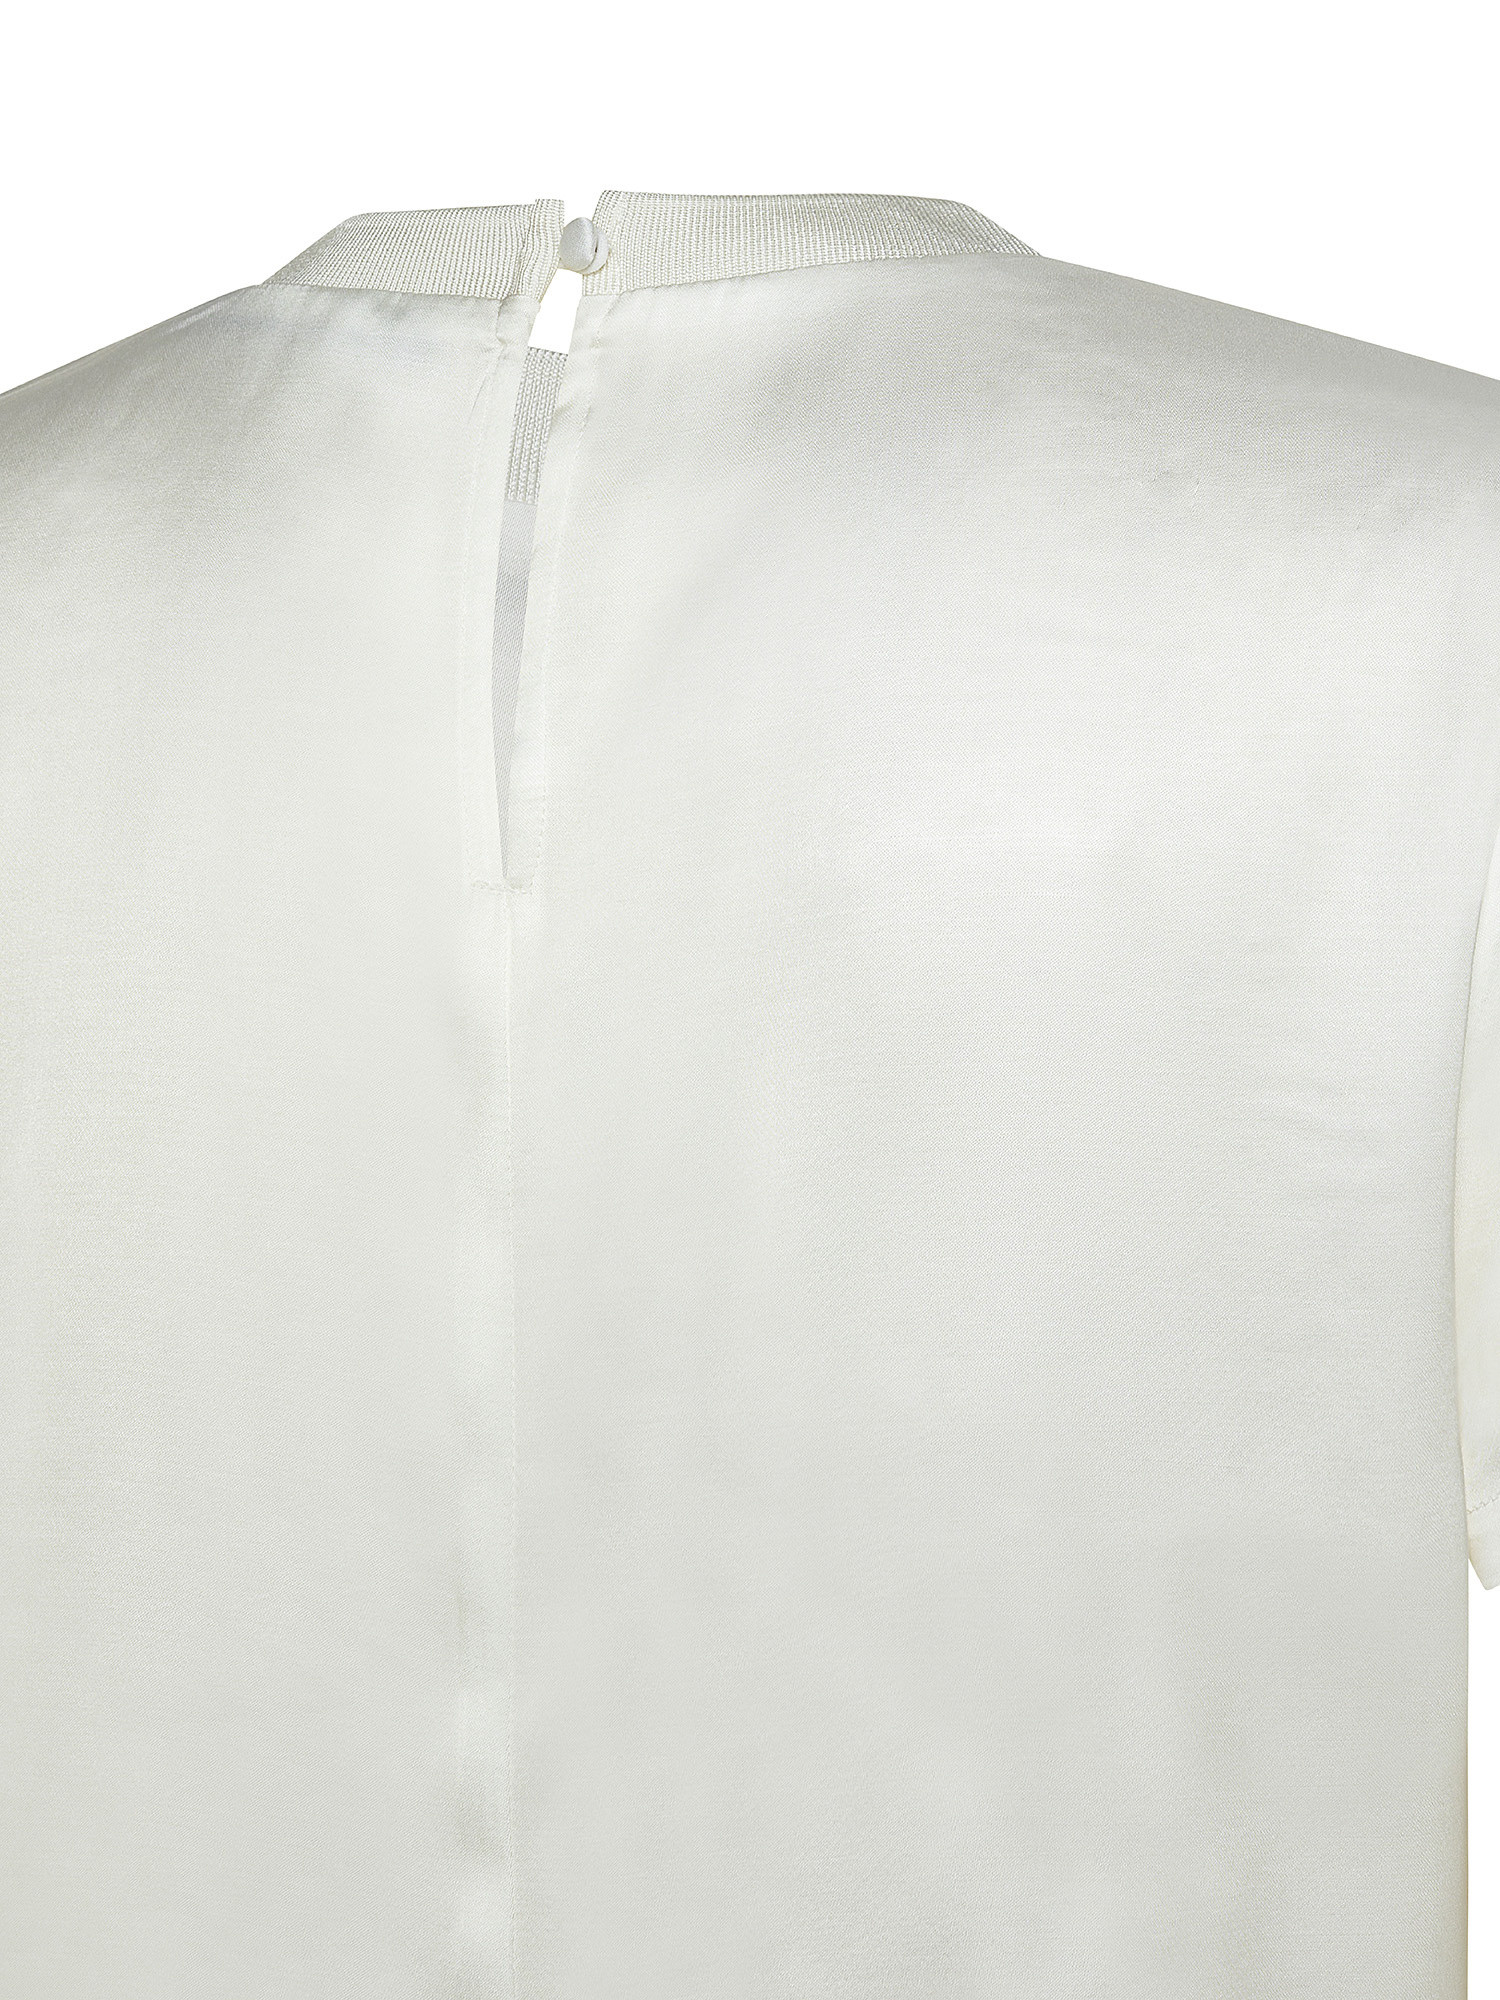 Blusa in raso, Bianco sporco, large image number 2